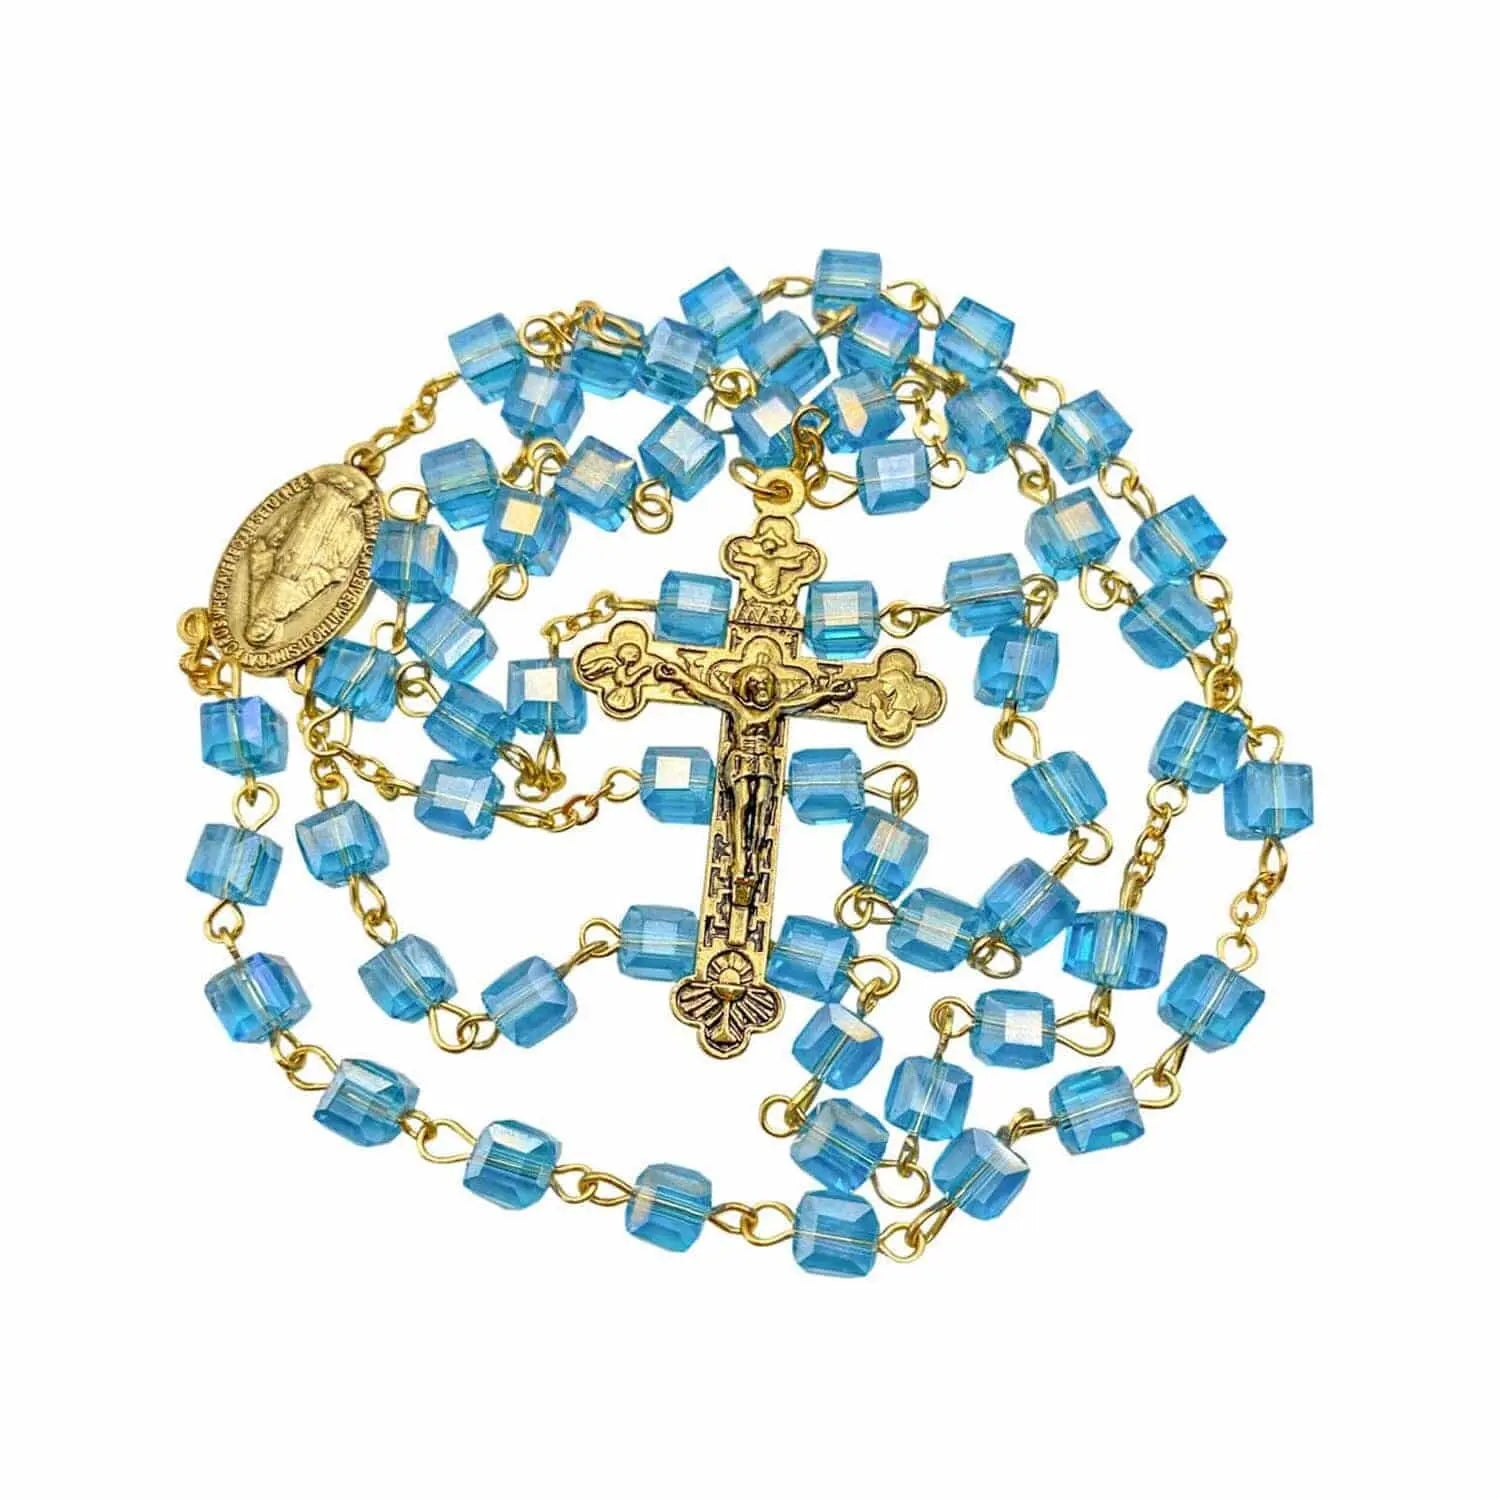 Why Gifting a Catholic Faith Item is so Touching and Important?